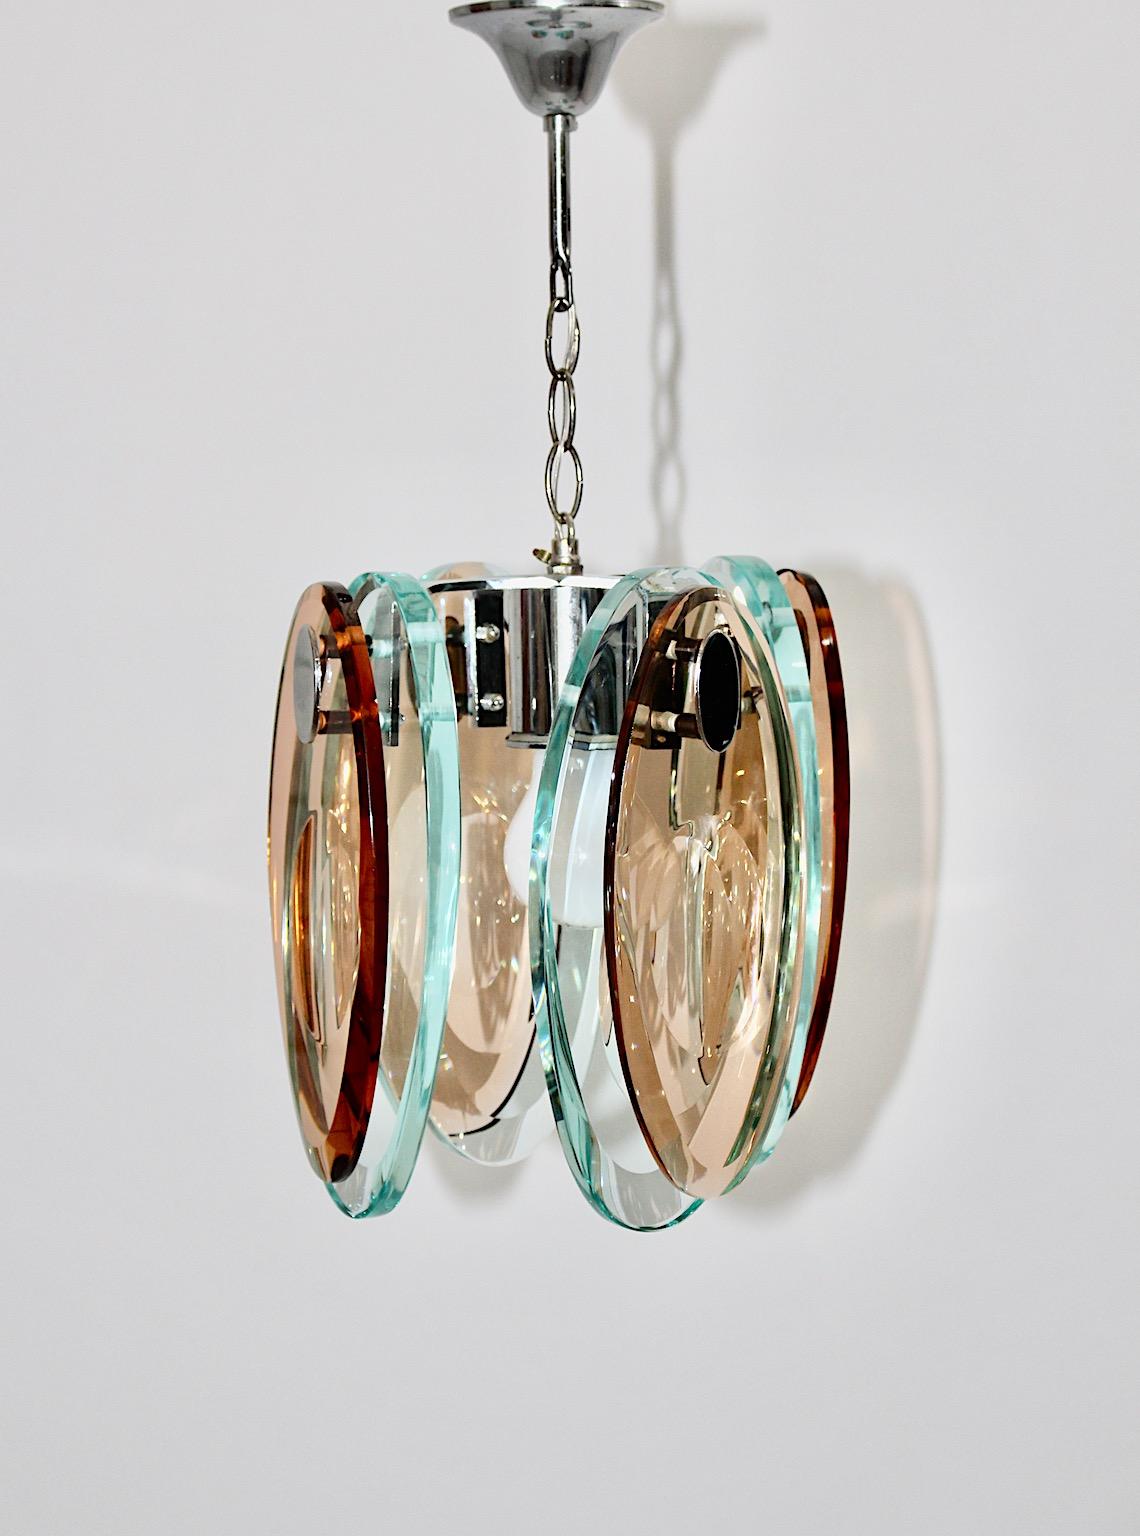 Modern vintage chandelier or pendant Fontana Arte style in blue teal and brown thick glass sheets and chromed metal 1970s Italy.
An amazing glass chandelier or pendant from polished elliptical like thick glass sheets in stunning blue and brown with